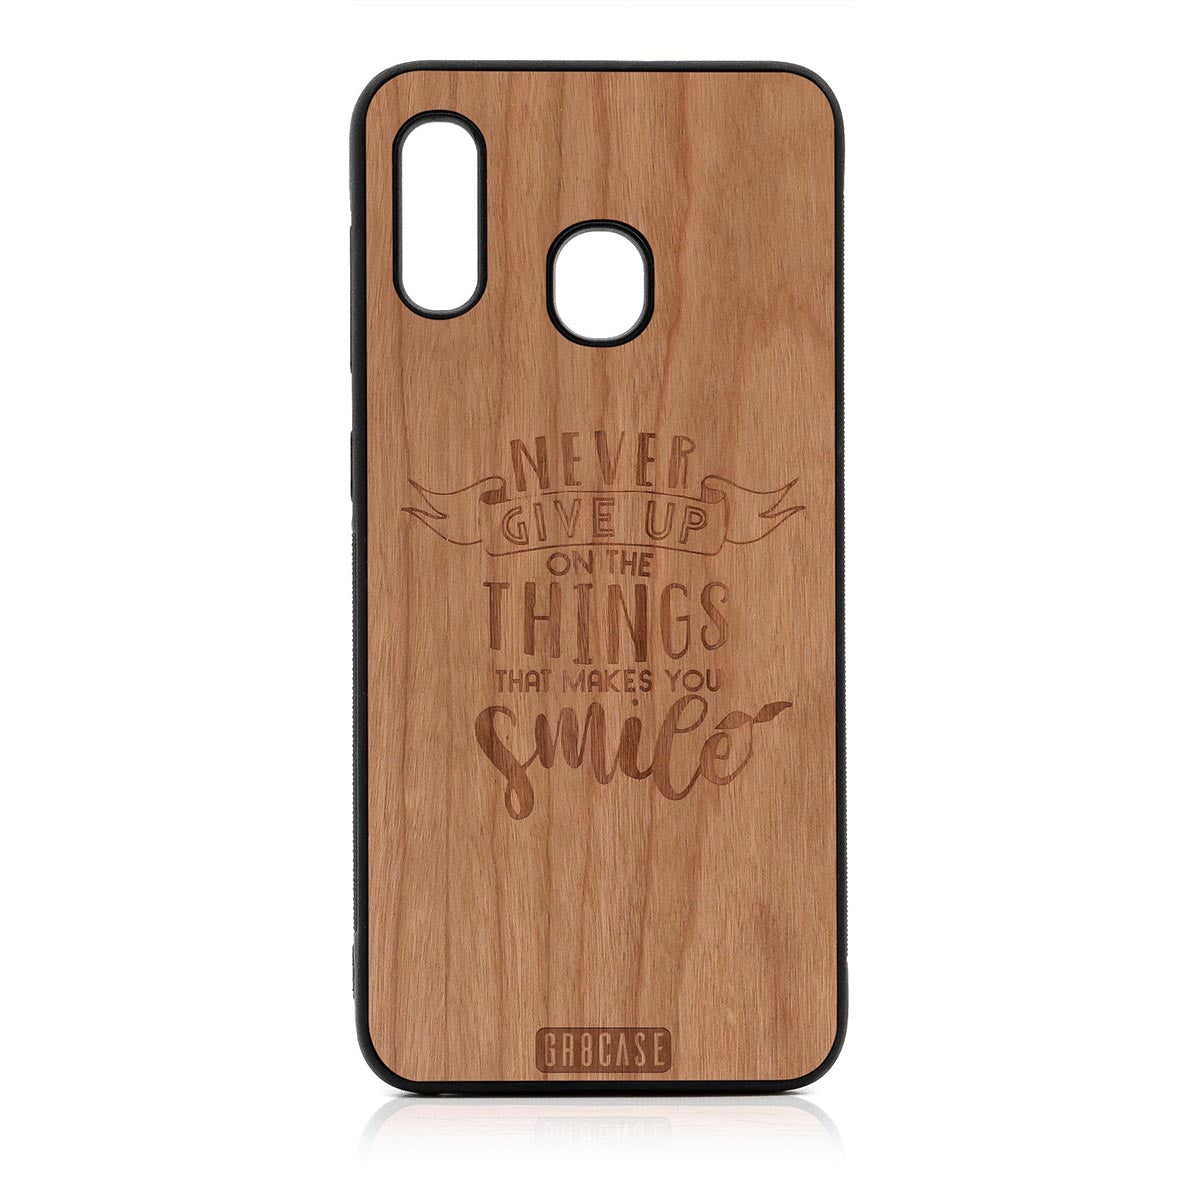 Never Give Up On The Things That Makes You Smile Design Wood Case For Samsung Galaxy A20 by GR8CASE